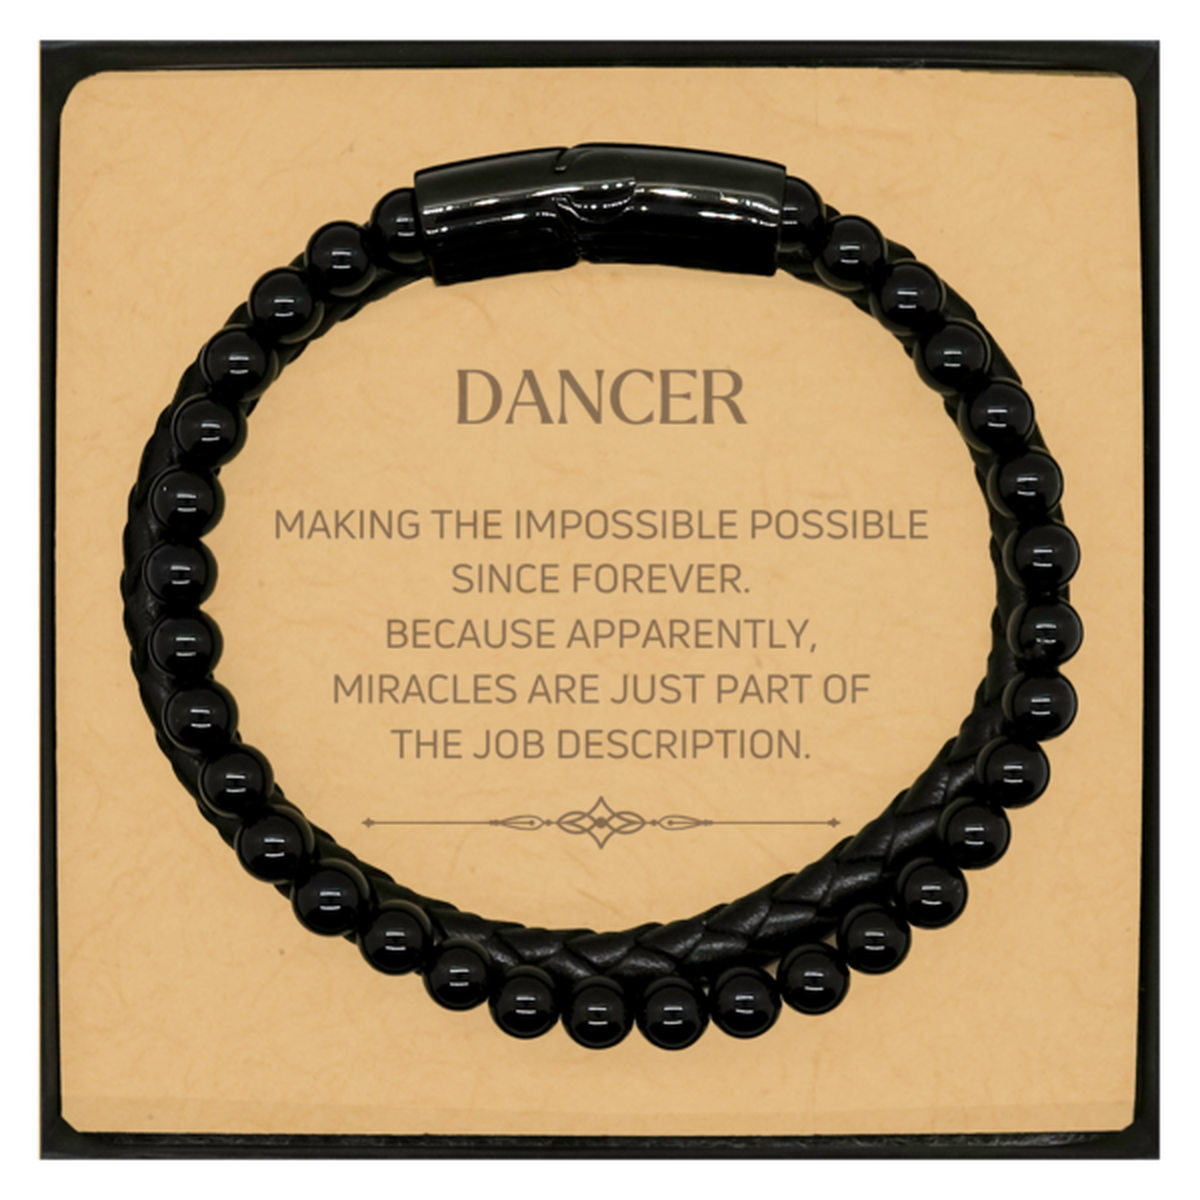 Funny Dancer Gifts, Miracles are just part of the job description, Inspirational Birthday Christmas Stone Leather Bracelets For Dancer, Men, Women, Coworkers, Friends, Boss